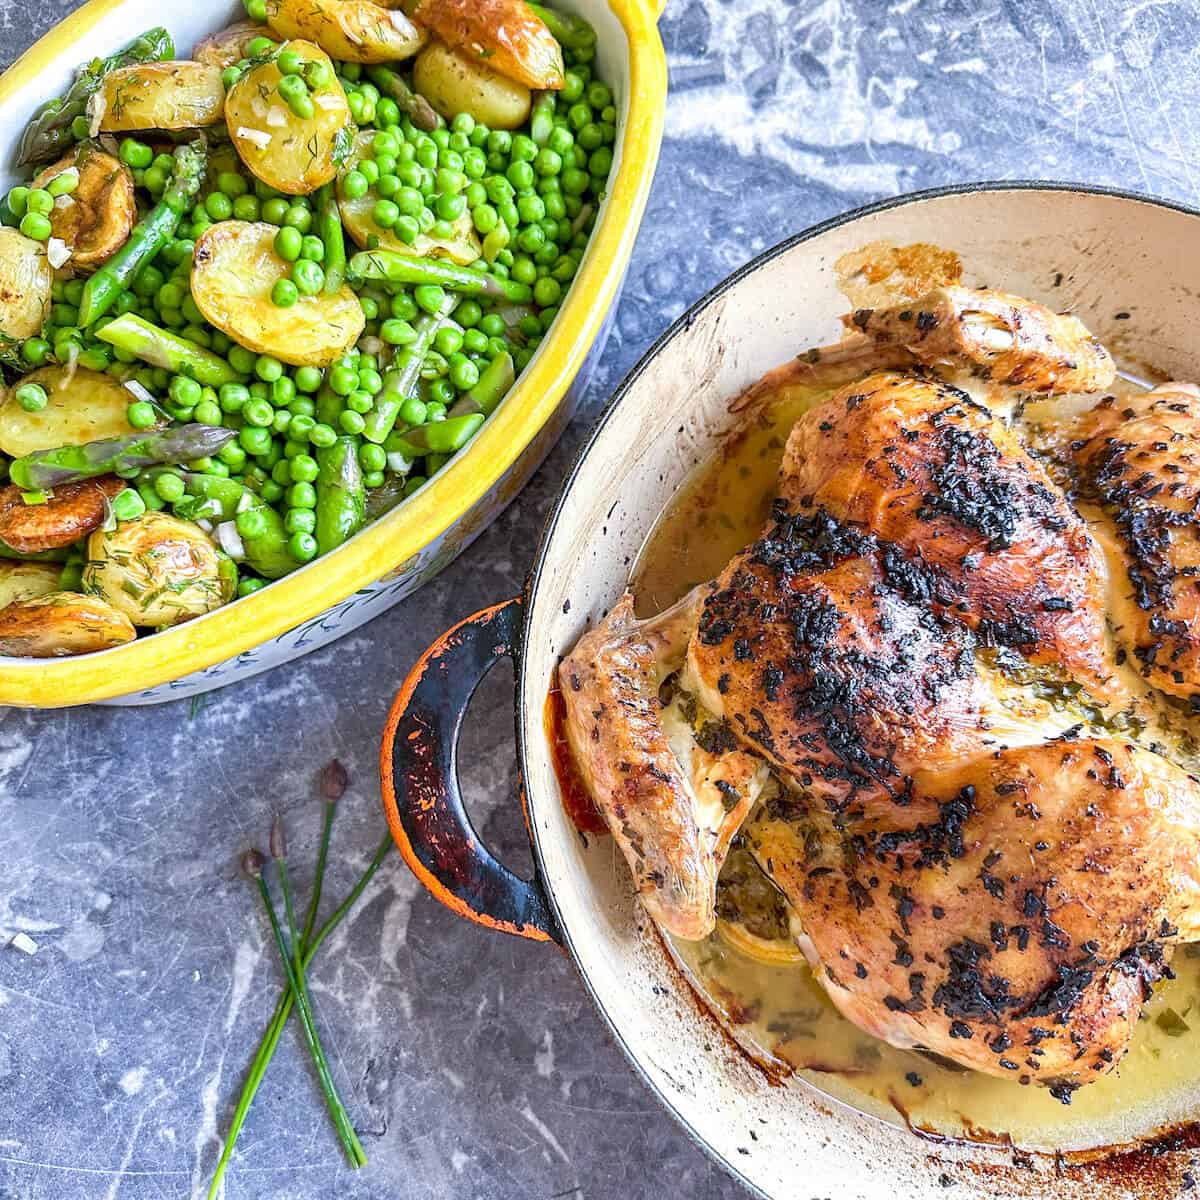 A serving dish of asparagus and potato salad next to a roasted chicken.